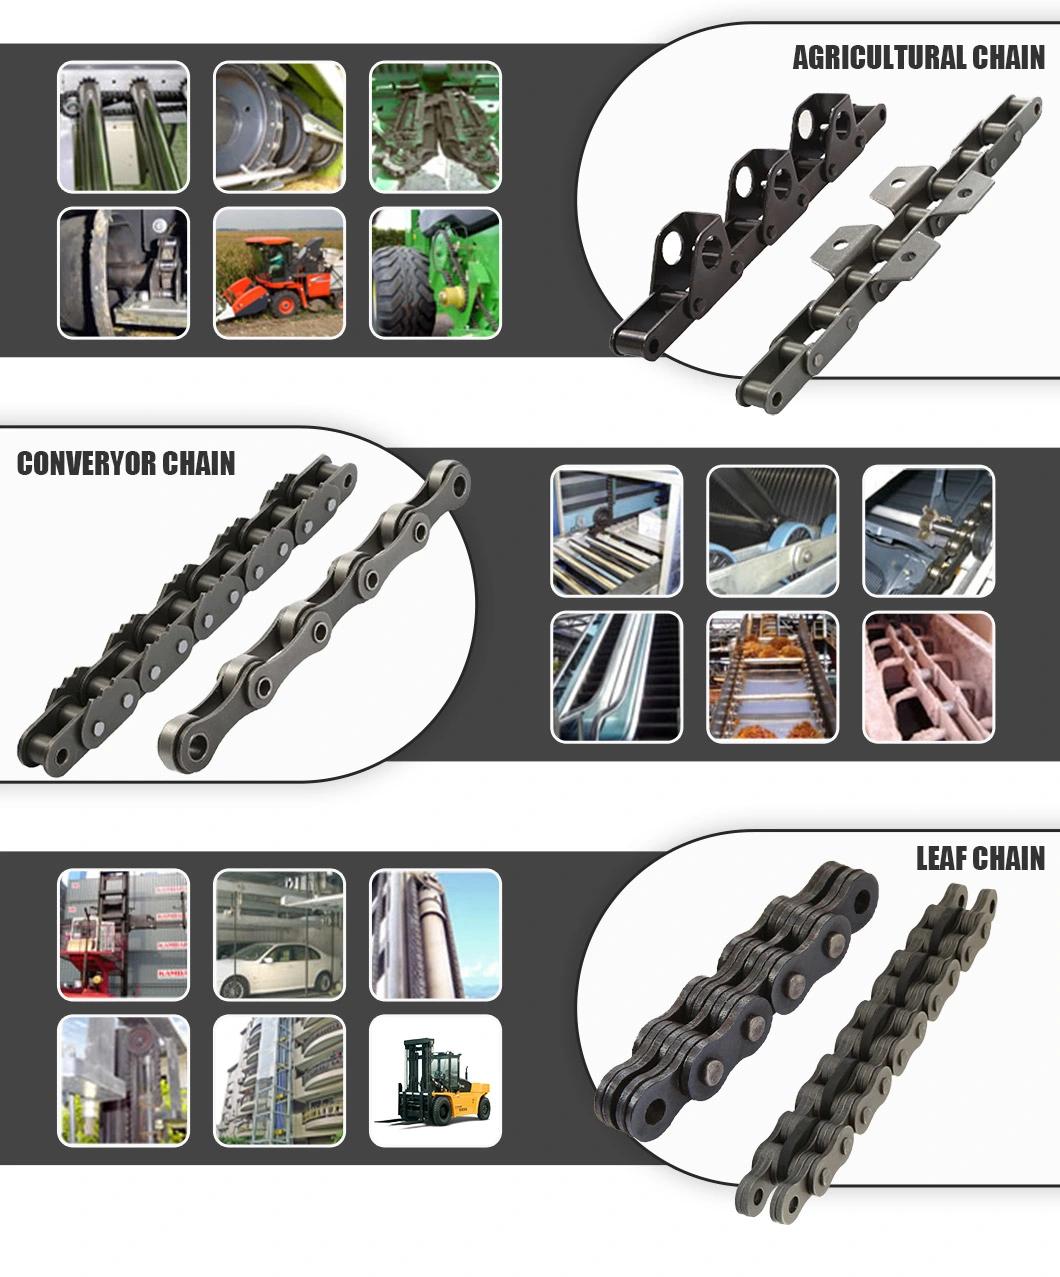 Zinc-Plated Engineering Industrial Agricultural Chain with Attachment